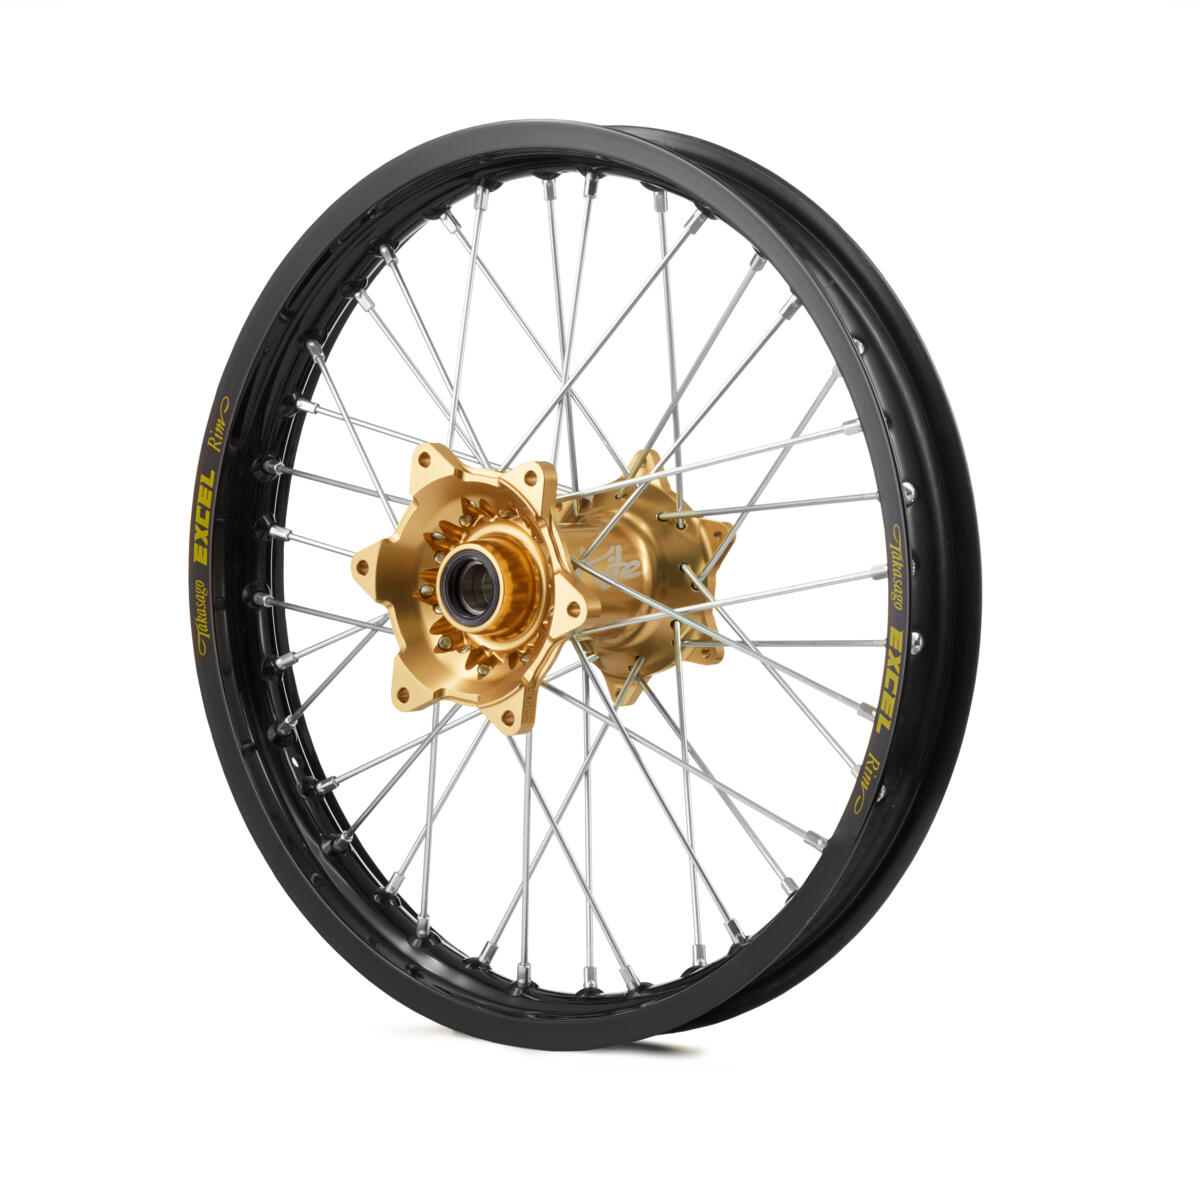 Wheels built for champions! Exclusive high performance Kite rear wheel as used by Yamaha factory racing teams.